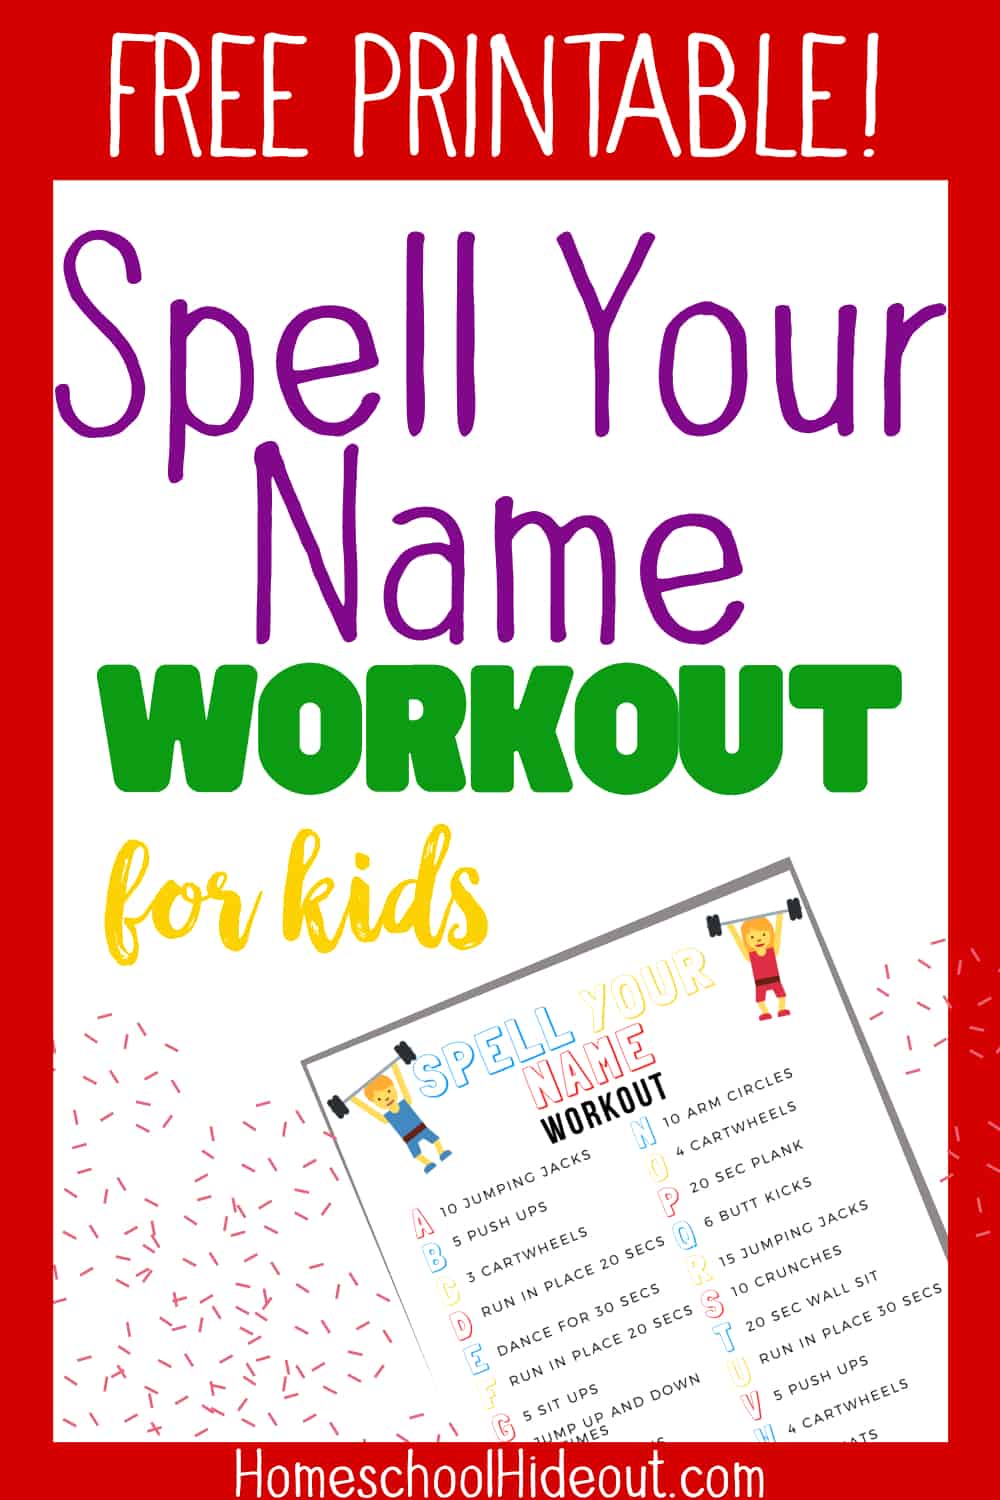 These easy workout ideas for kids to do indoors has made exercising so much fun! The free printable is EXACTLY what we needed for homeschool PE class!